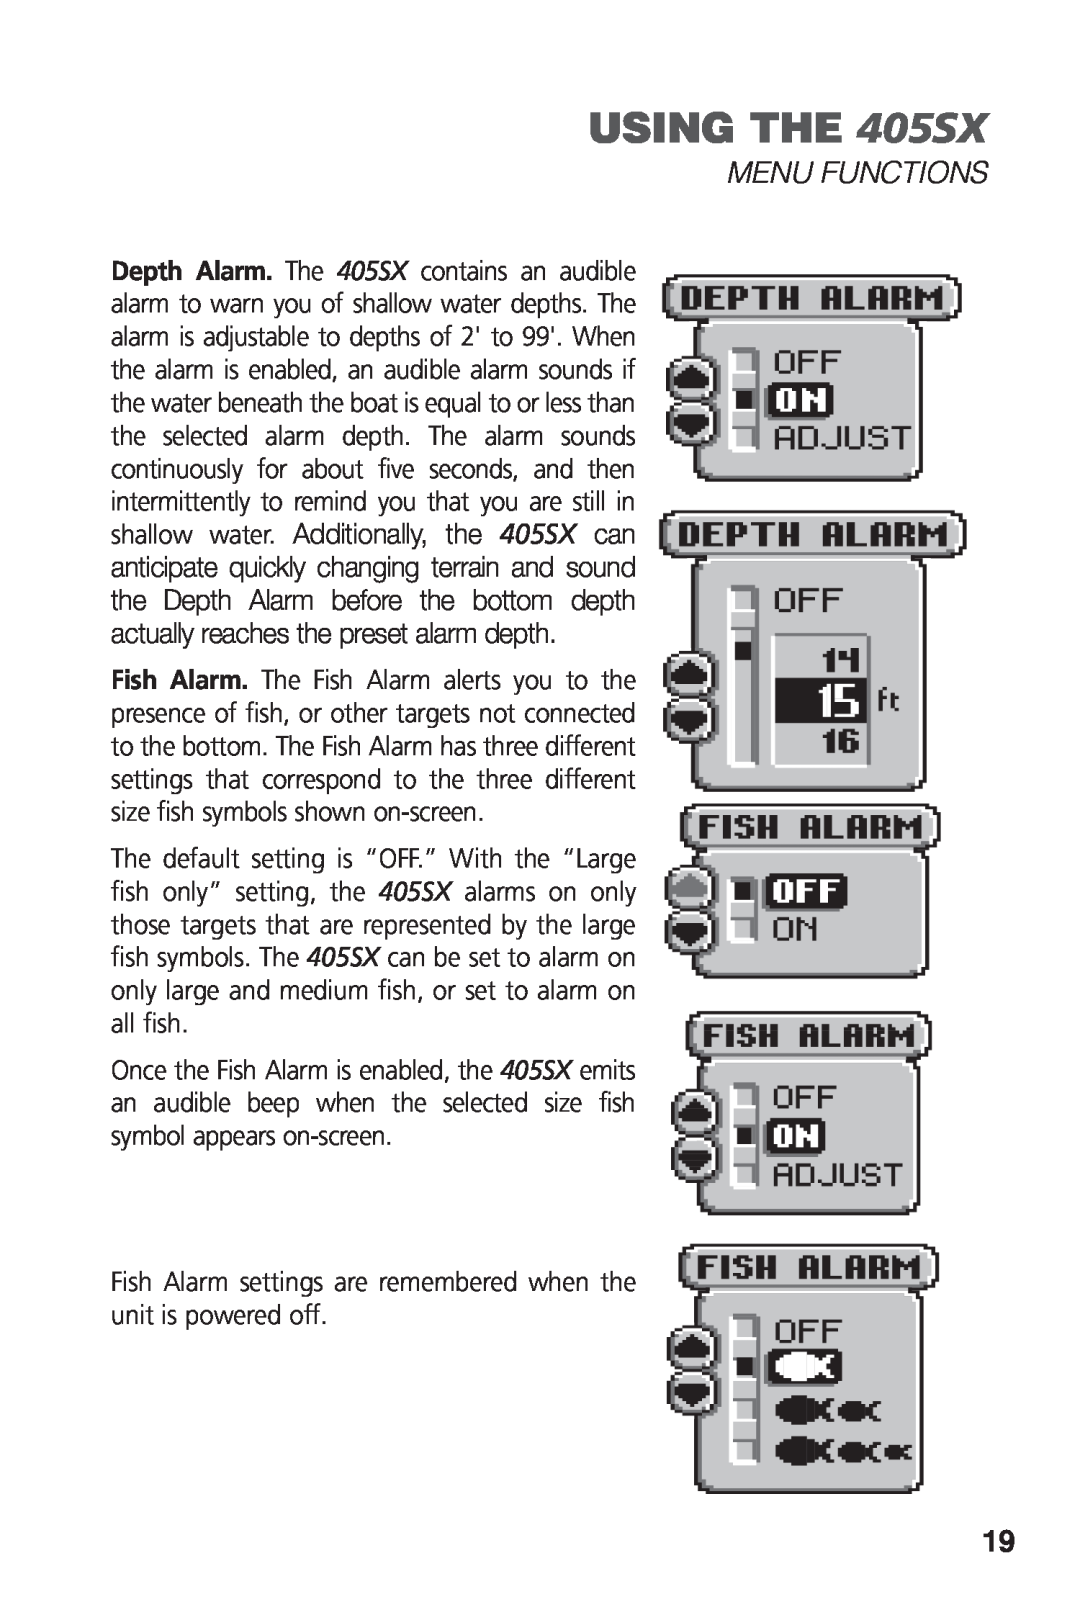 Humminbird manual USING THE 405SX, Menu Functions, Fish Alarm settings are remembered when the unit is powered off 